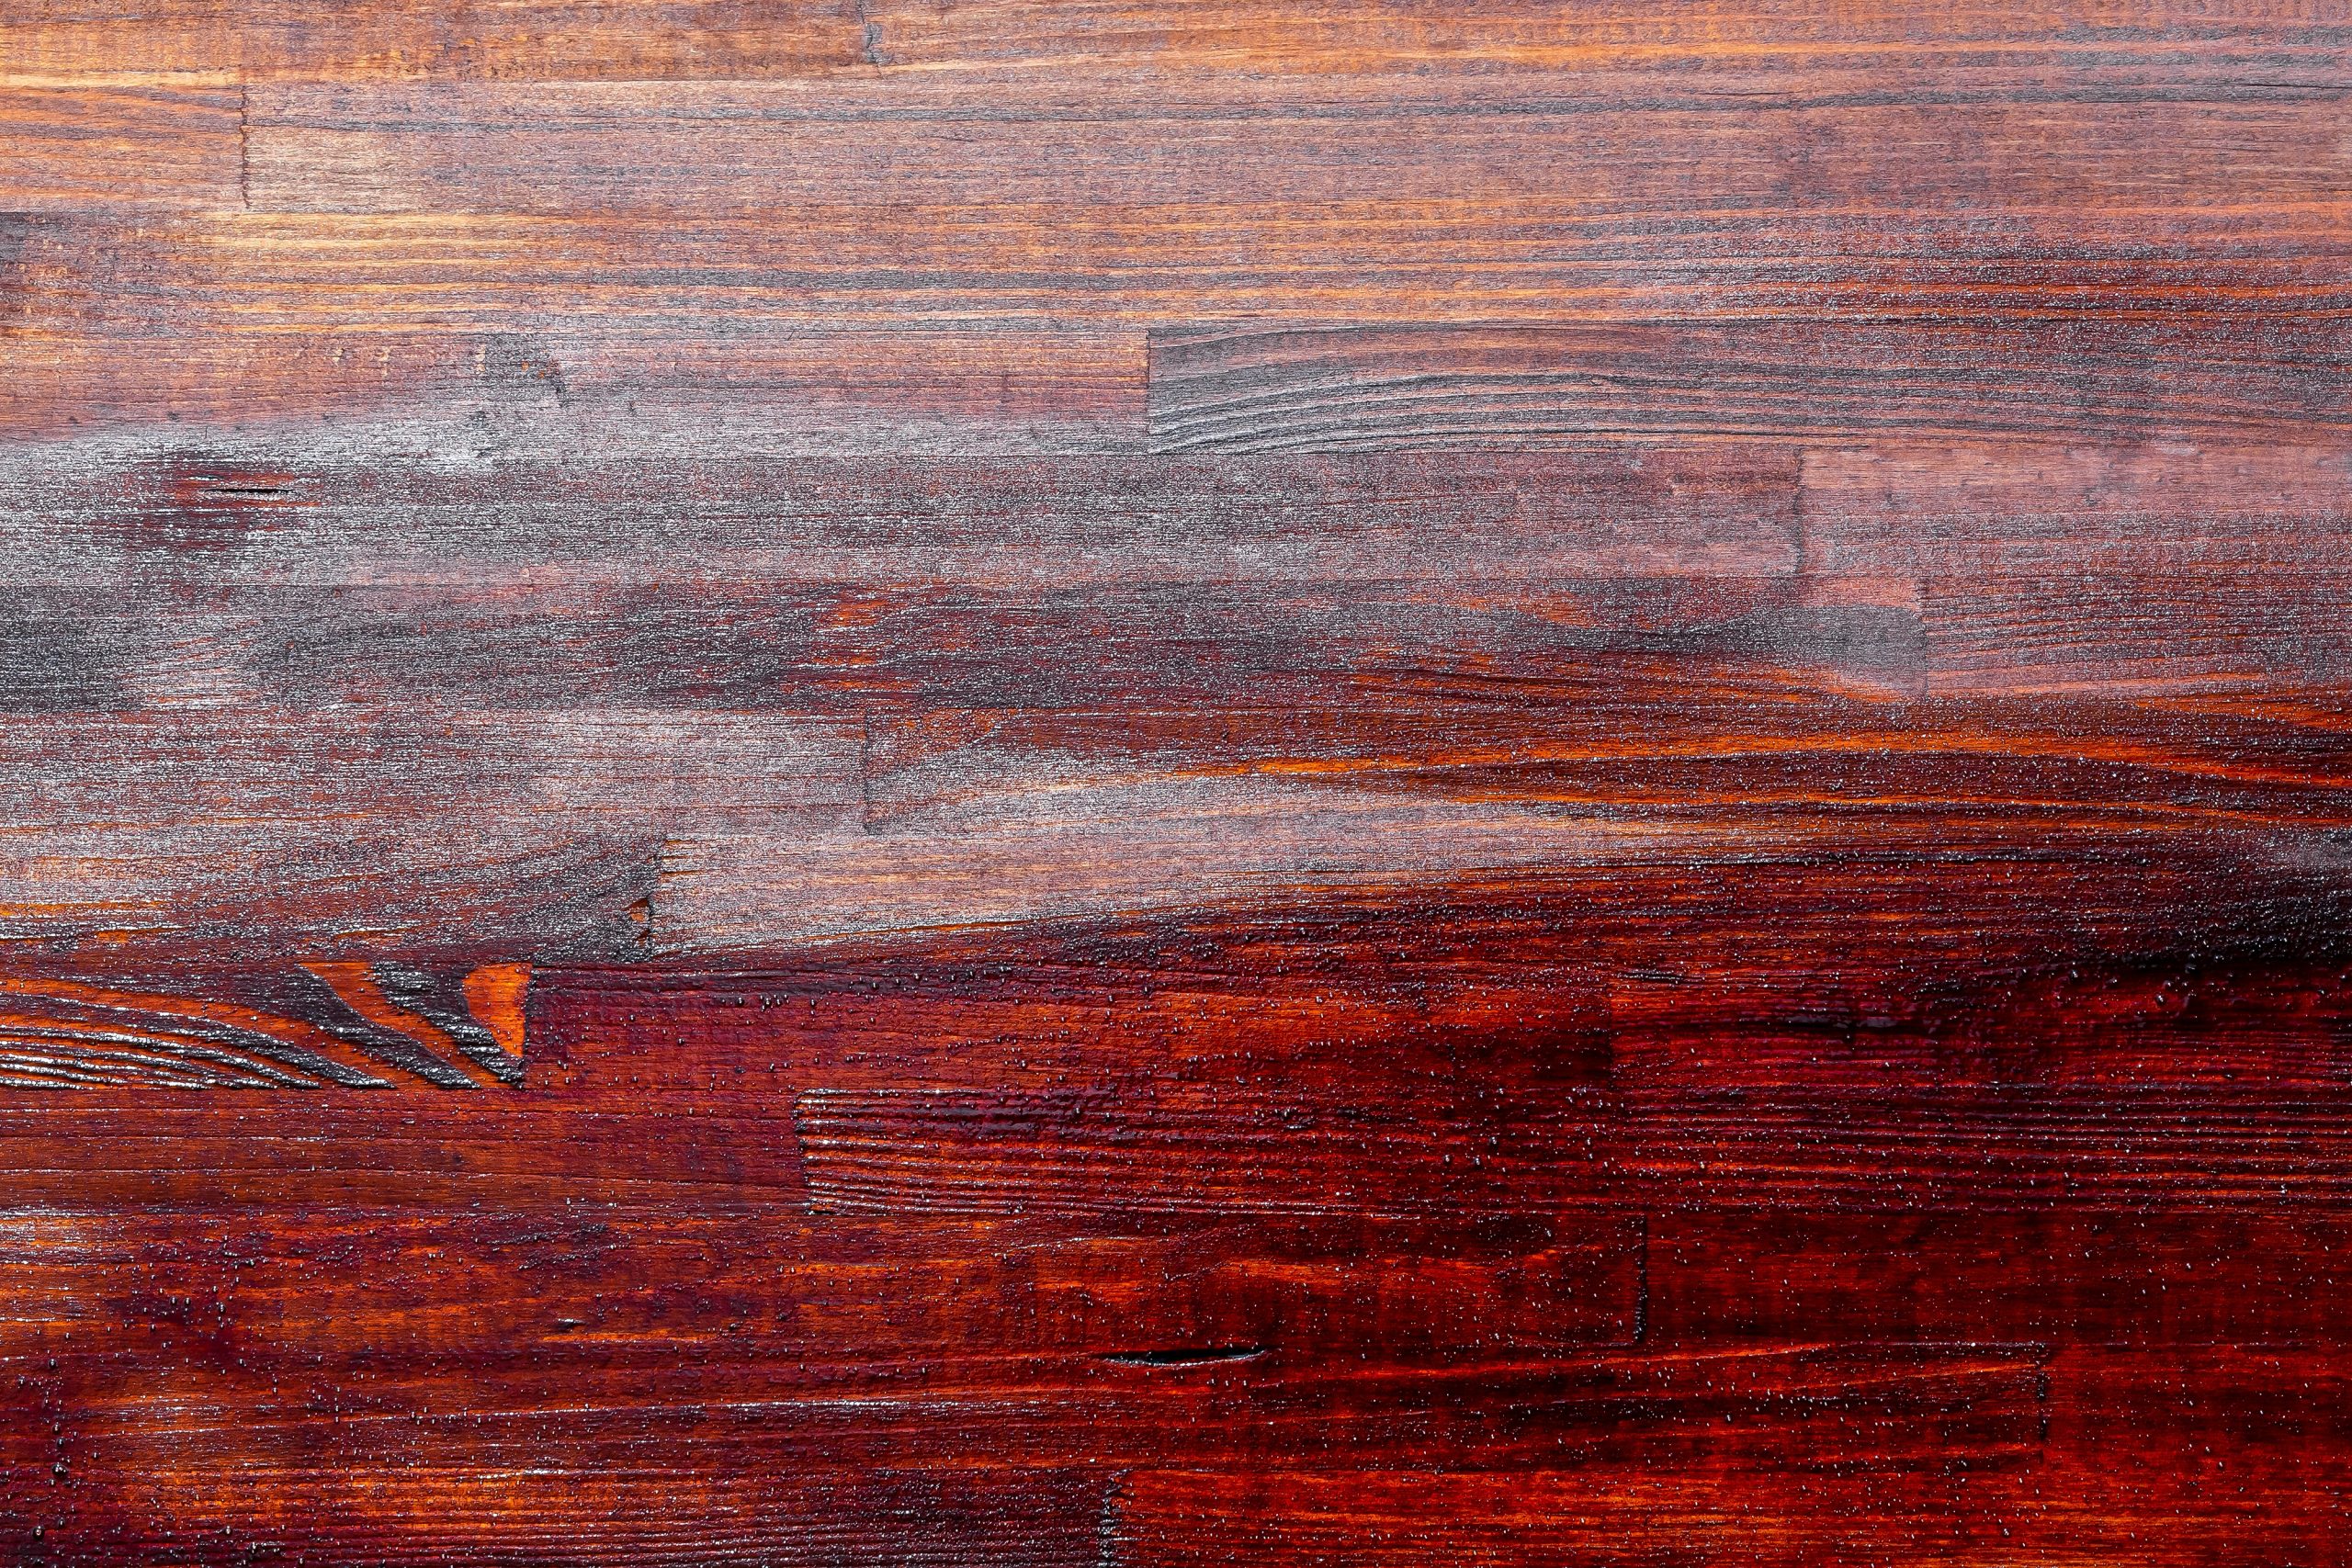 Why Traditional Wood Furniture is Stained Dark